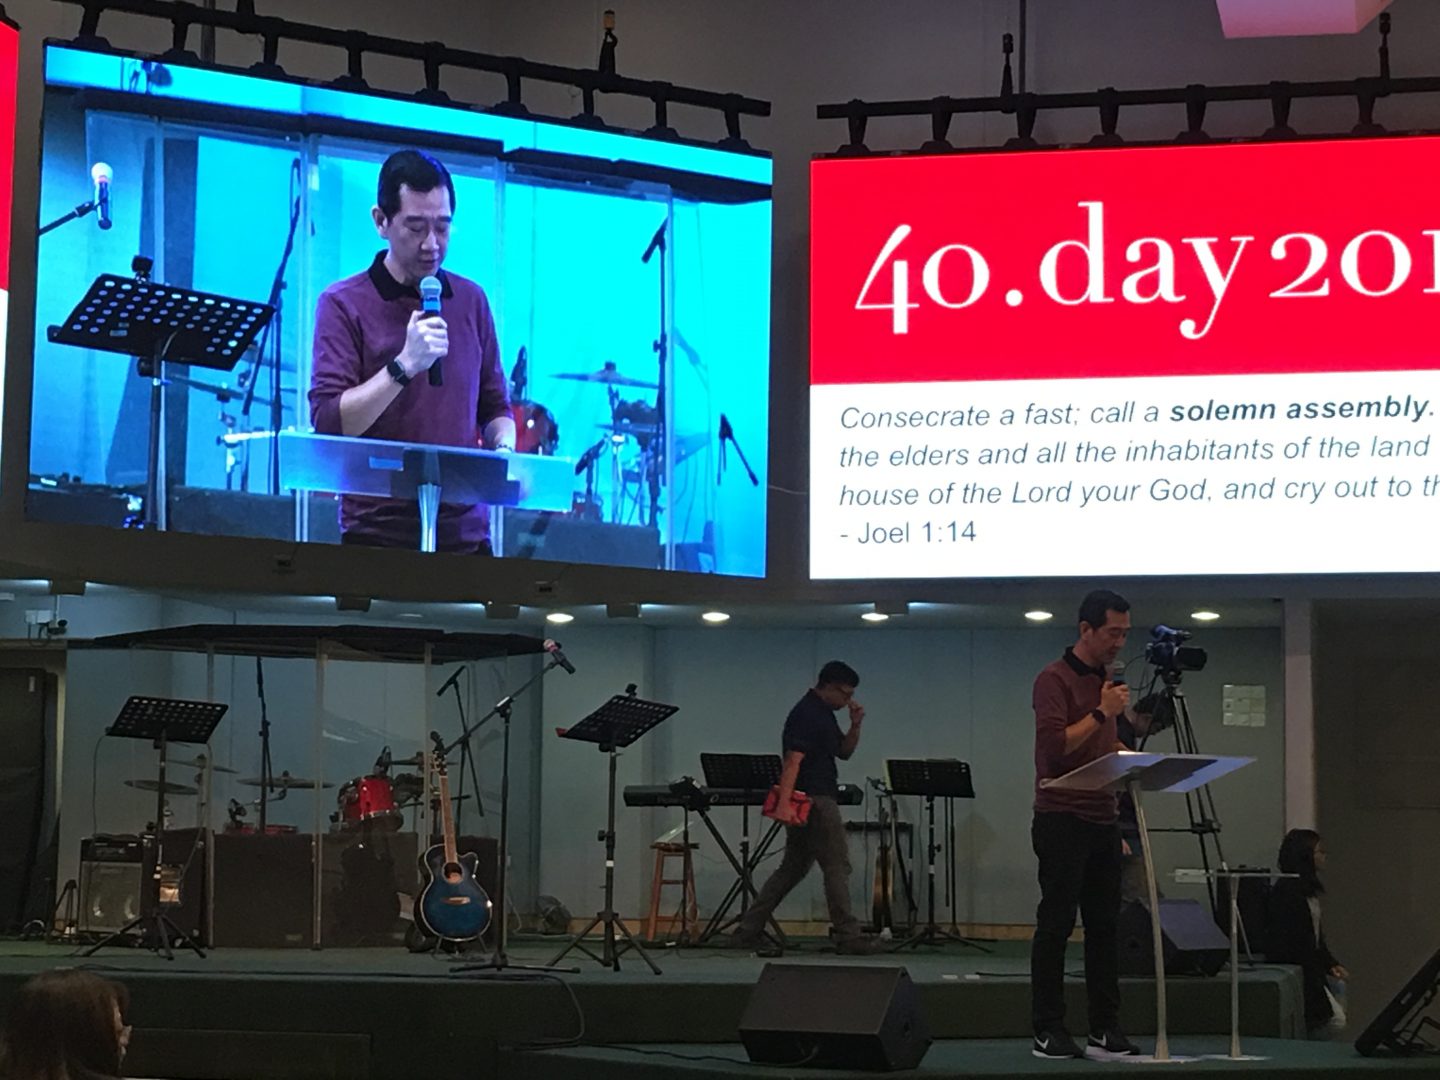 Kok Hiang speaking at a LoveSingapore 40-day prayer event.